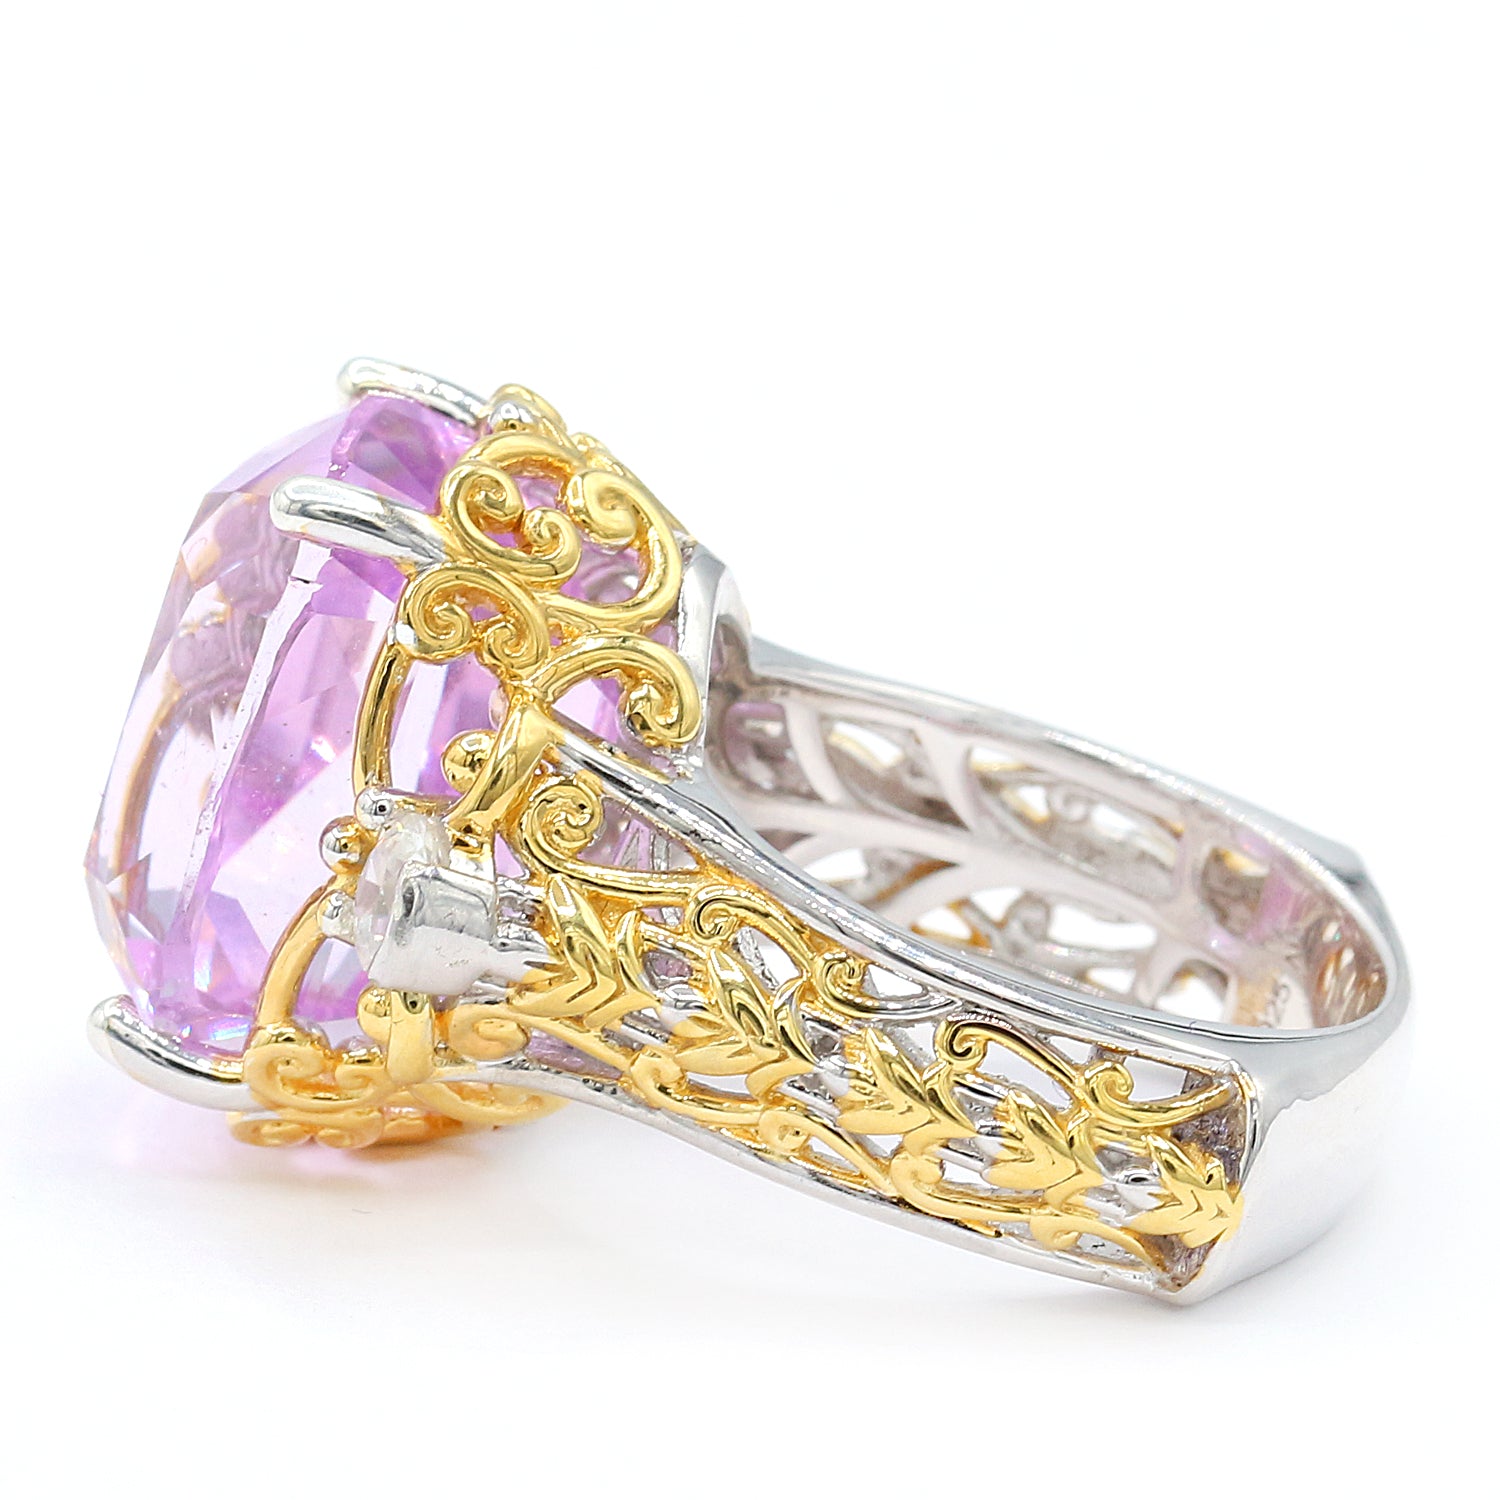 Limited Edition Gems en Vogue Luxe, One-of-a-Kind 23.39ctw Kunzite & White Zircon Ring